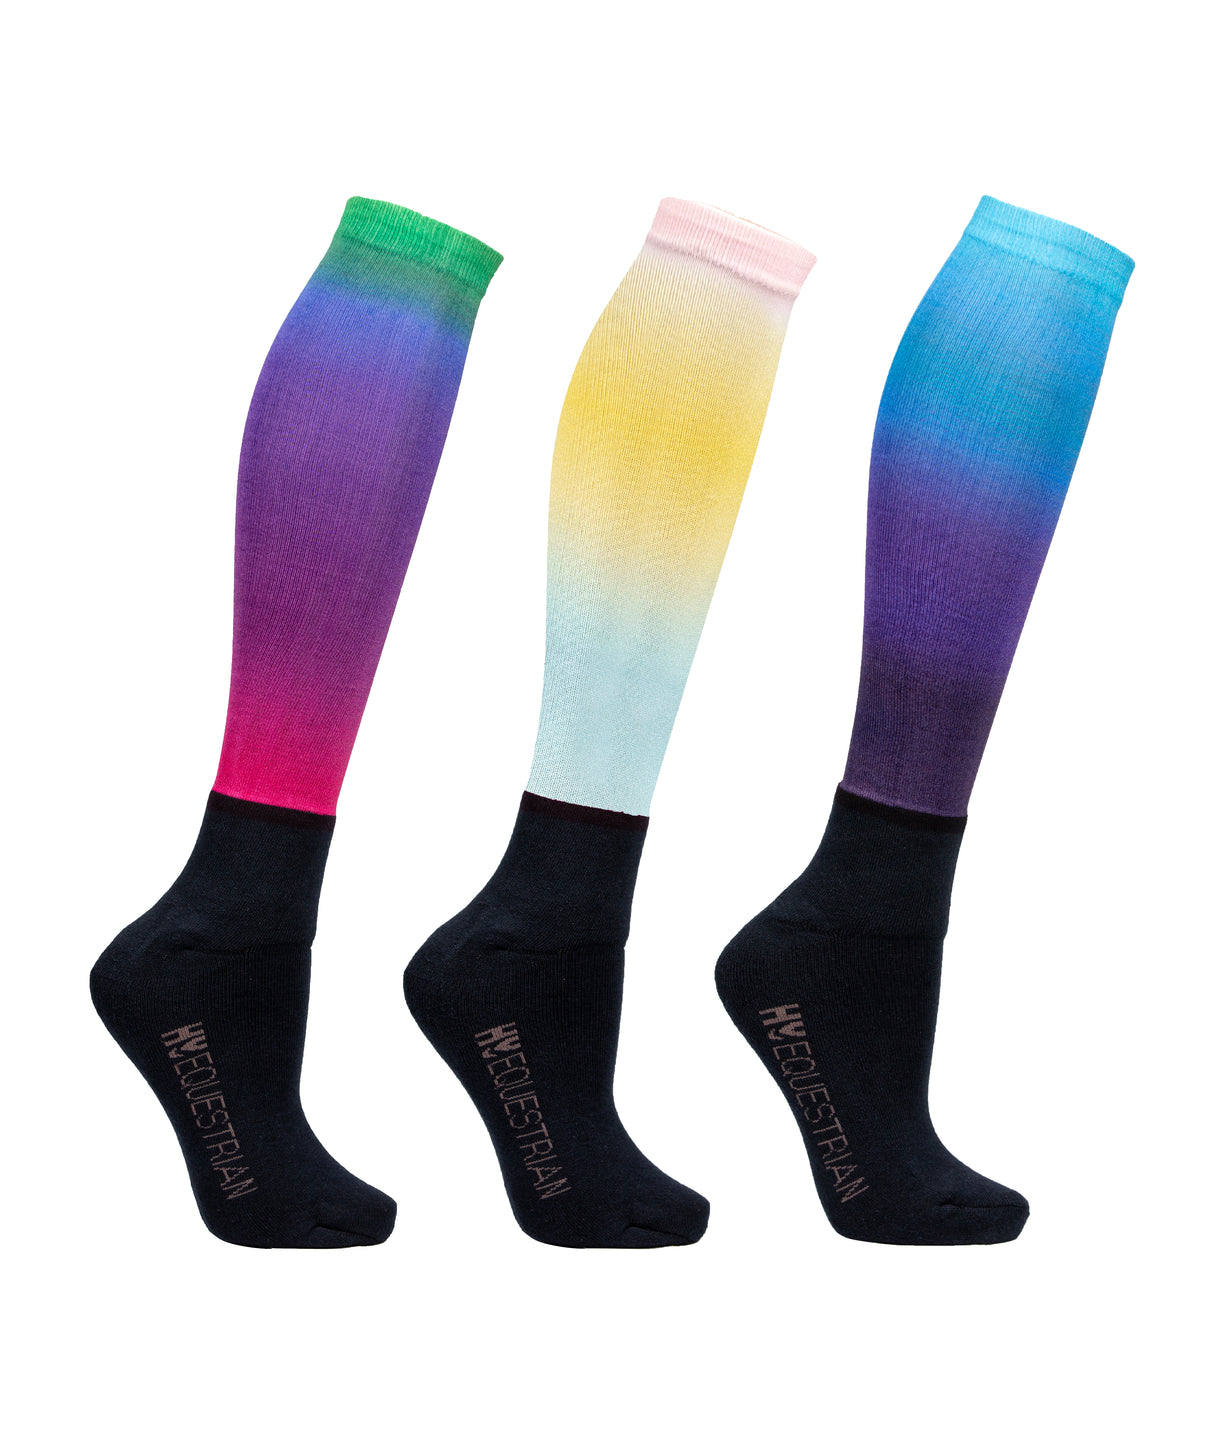 Hy Equestrian Ombre Socks - Pack of 3